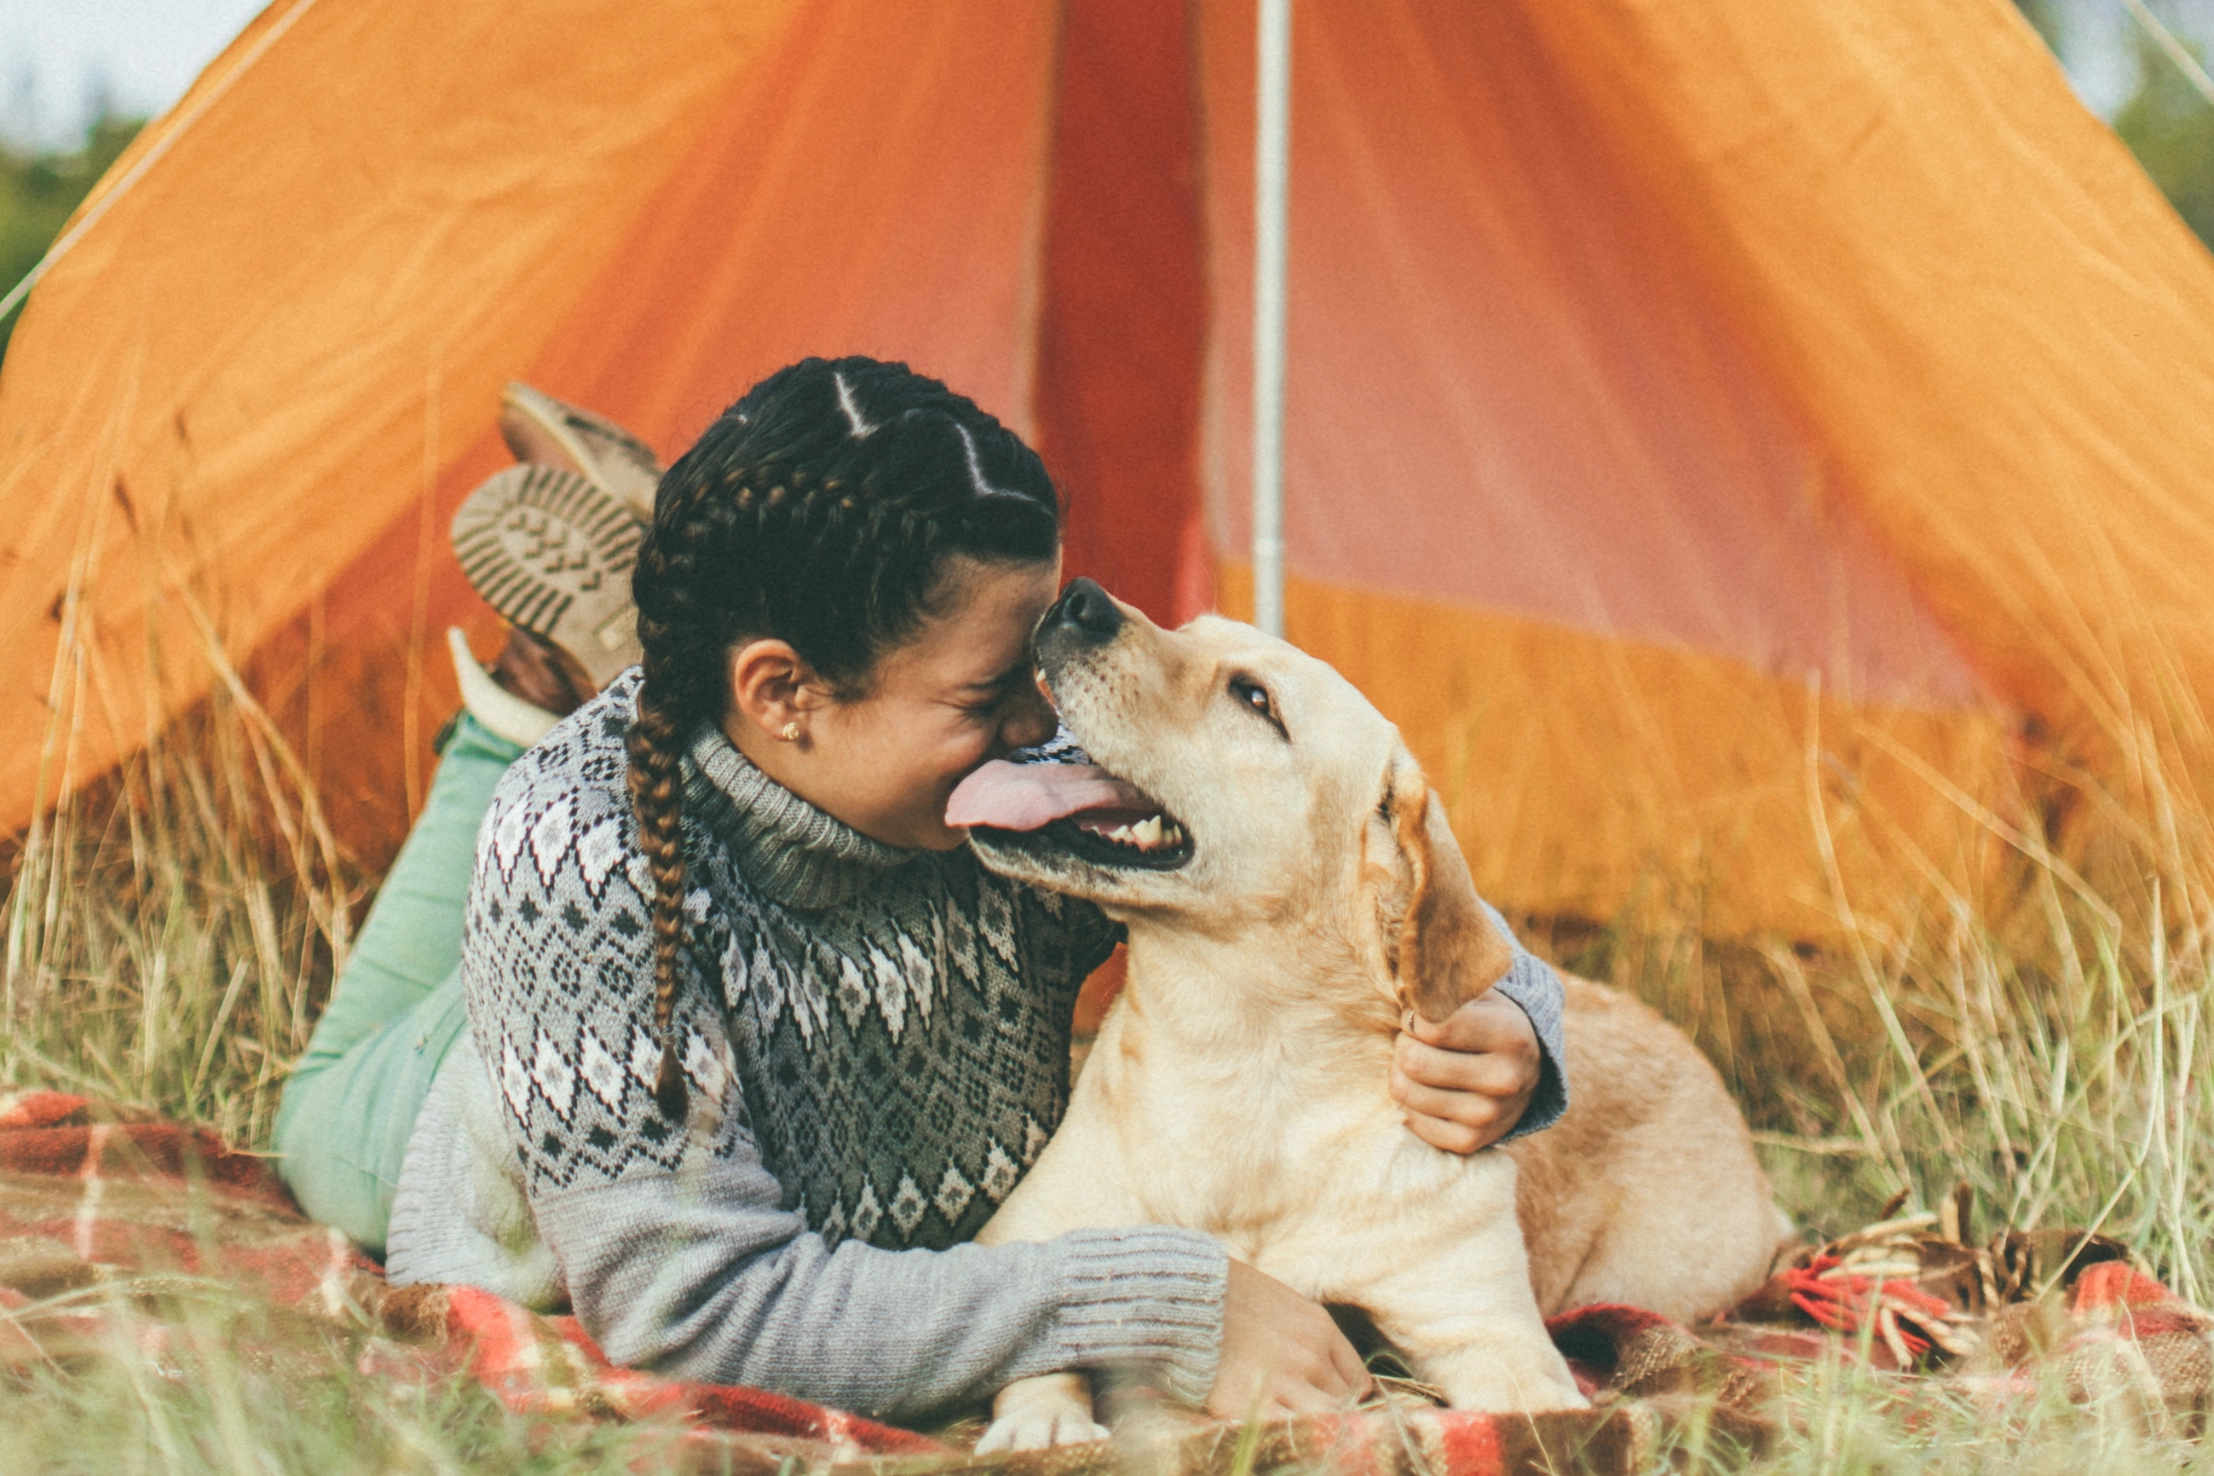 woman in tent with dog